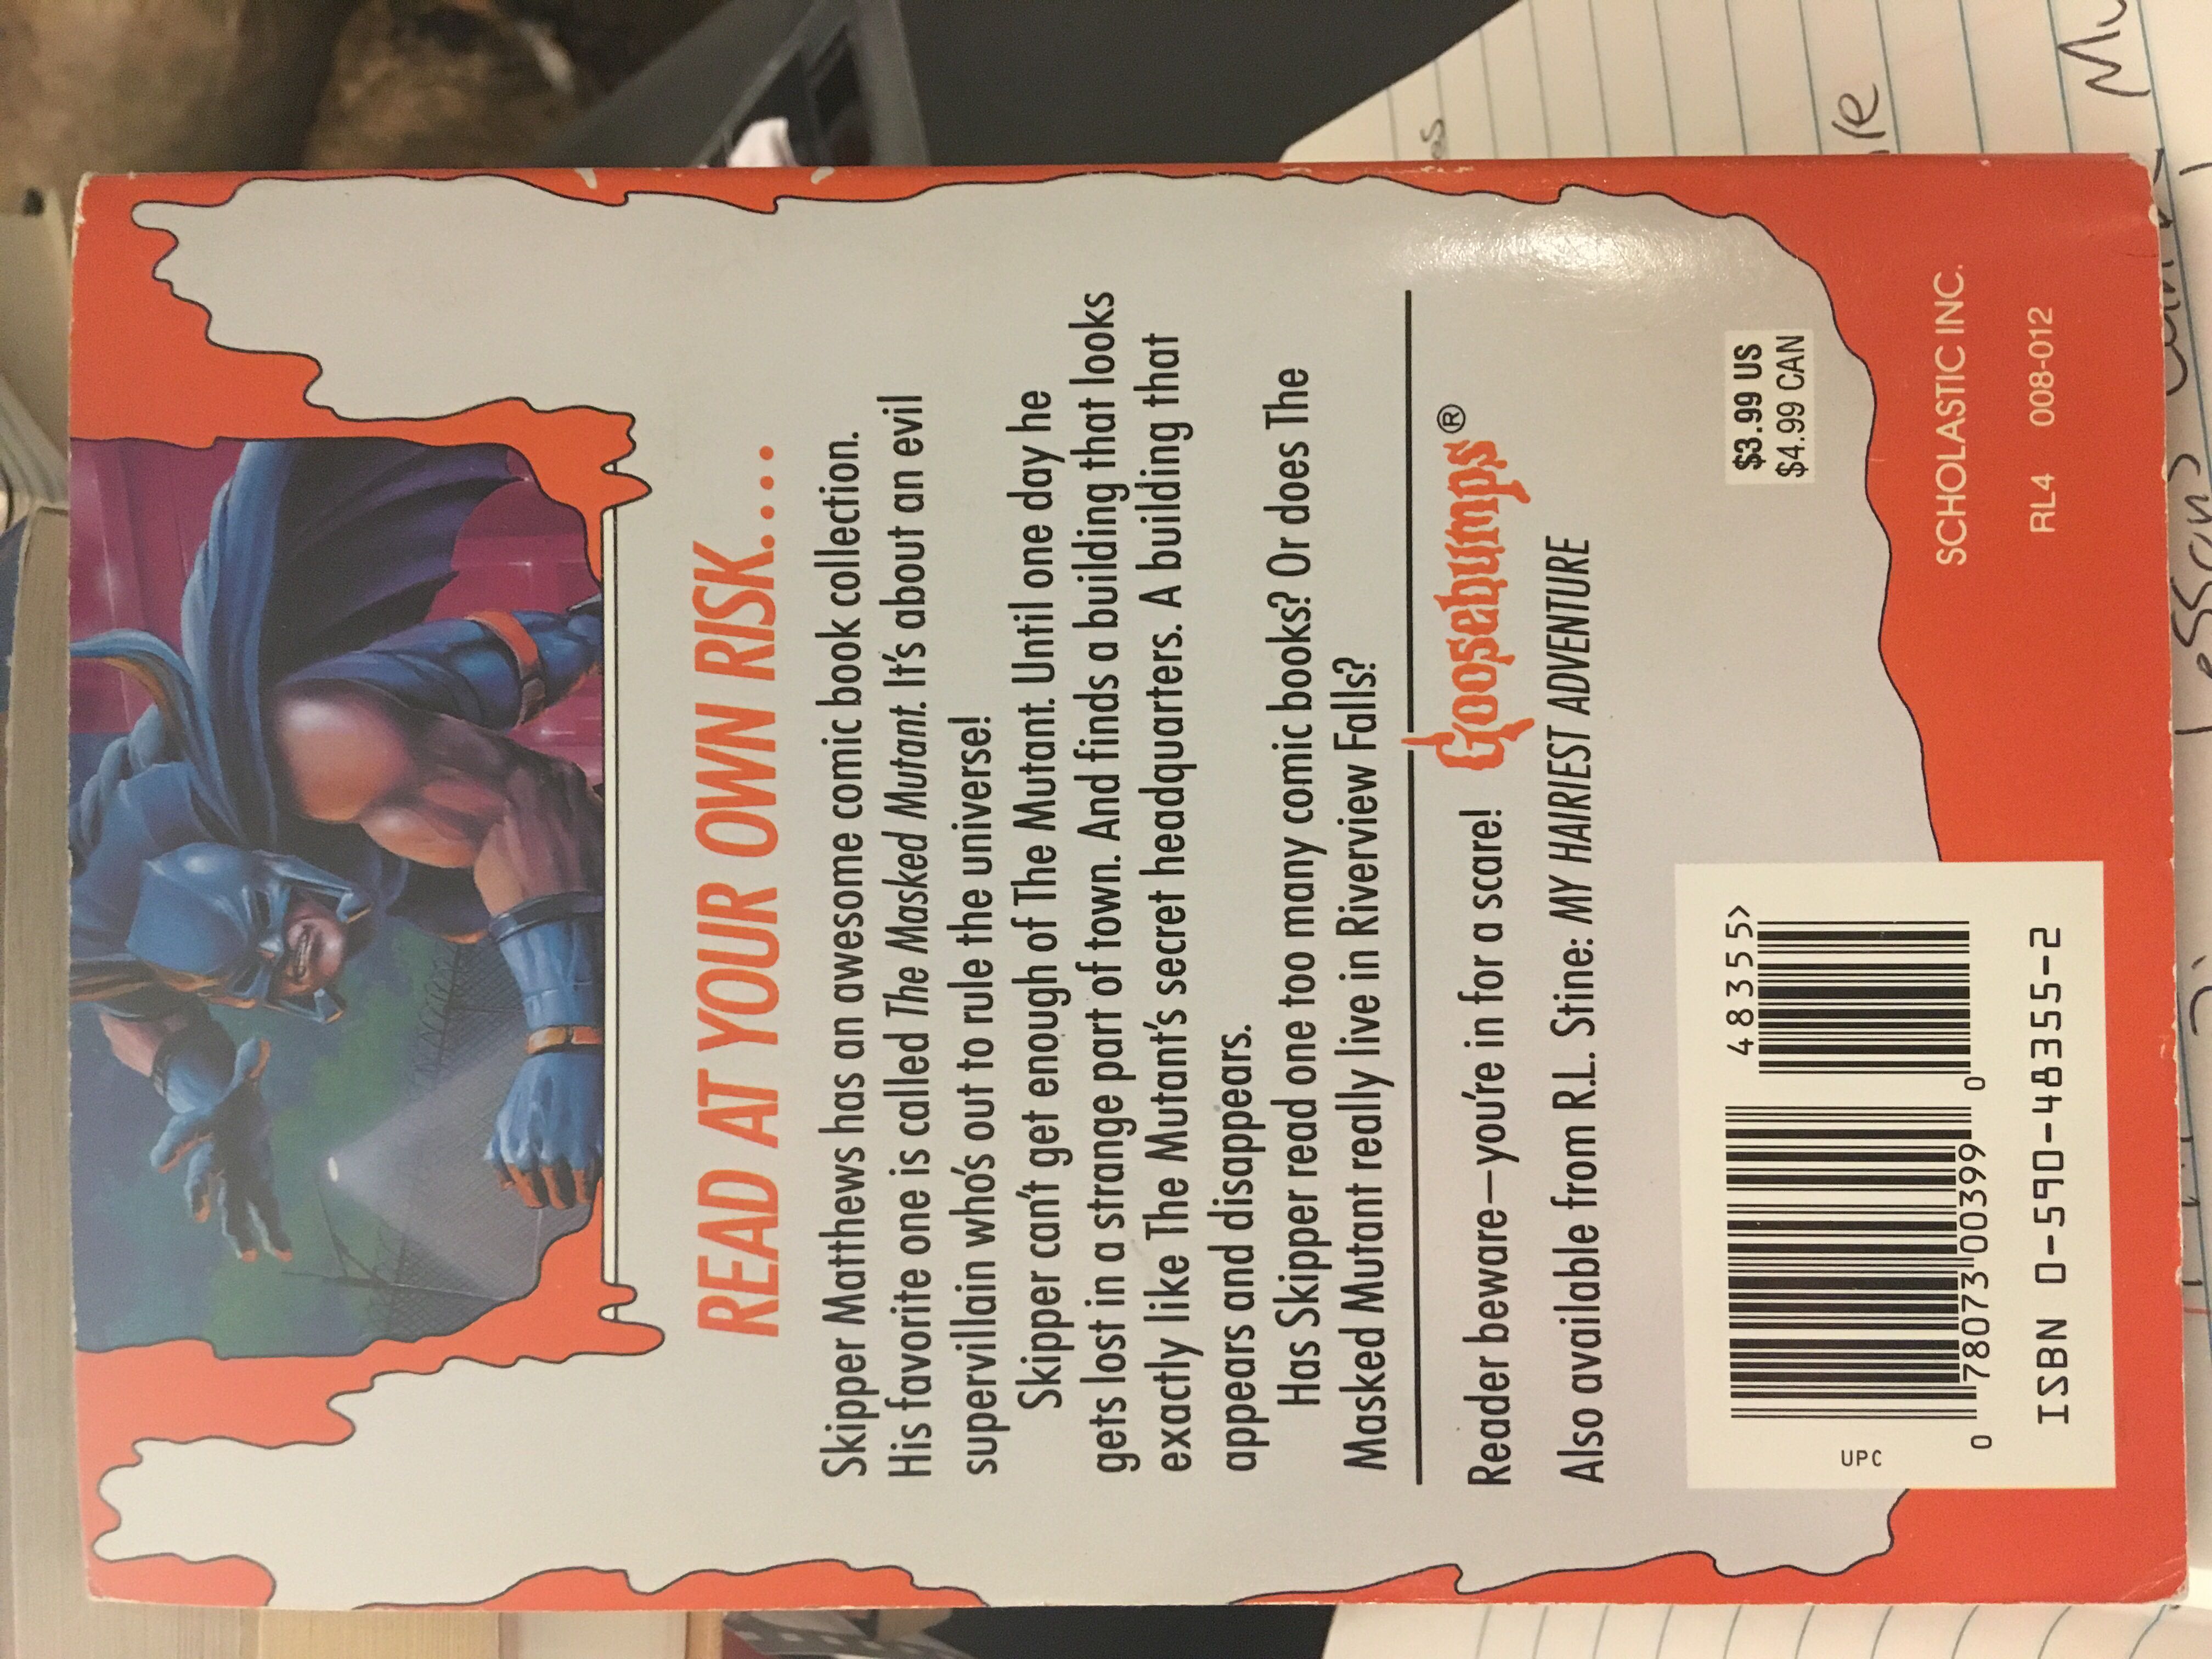 Goosebumps #25: Attack Of the Mutant - R. L. Stine (- Paperback) book collectible [Barcode 0590483552] - Main Image 2